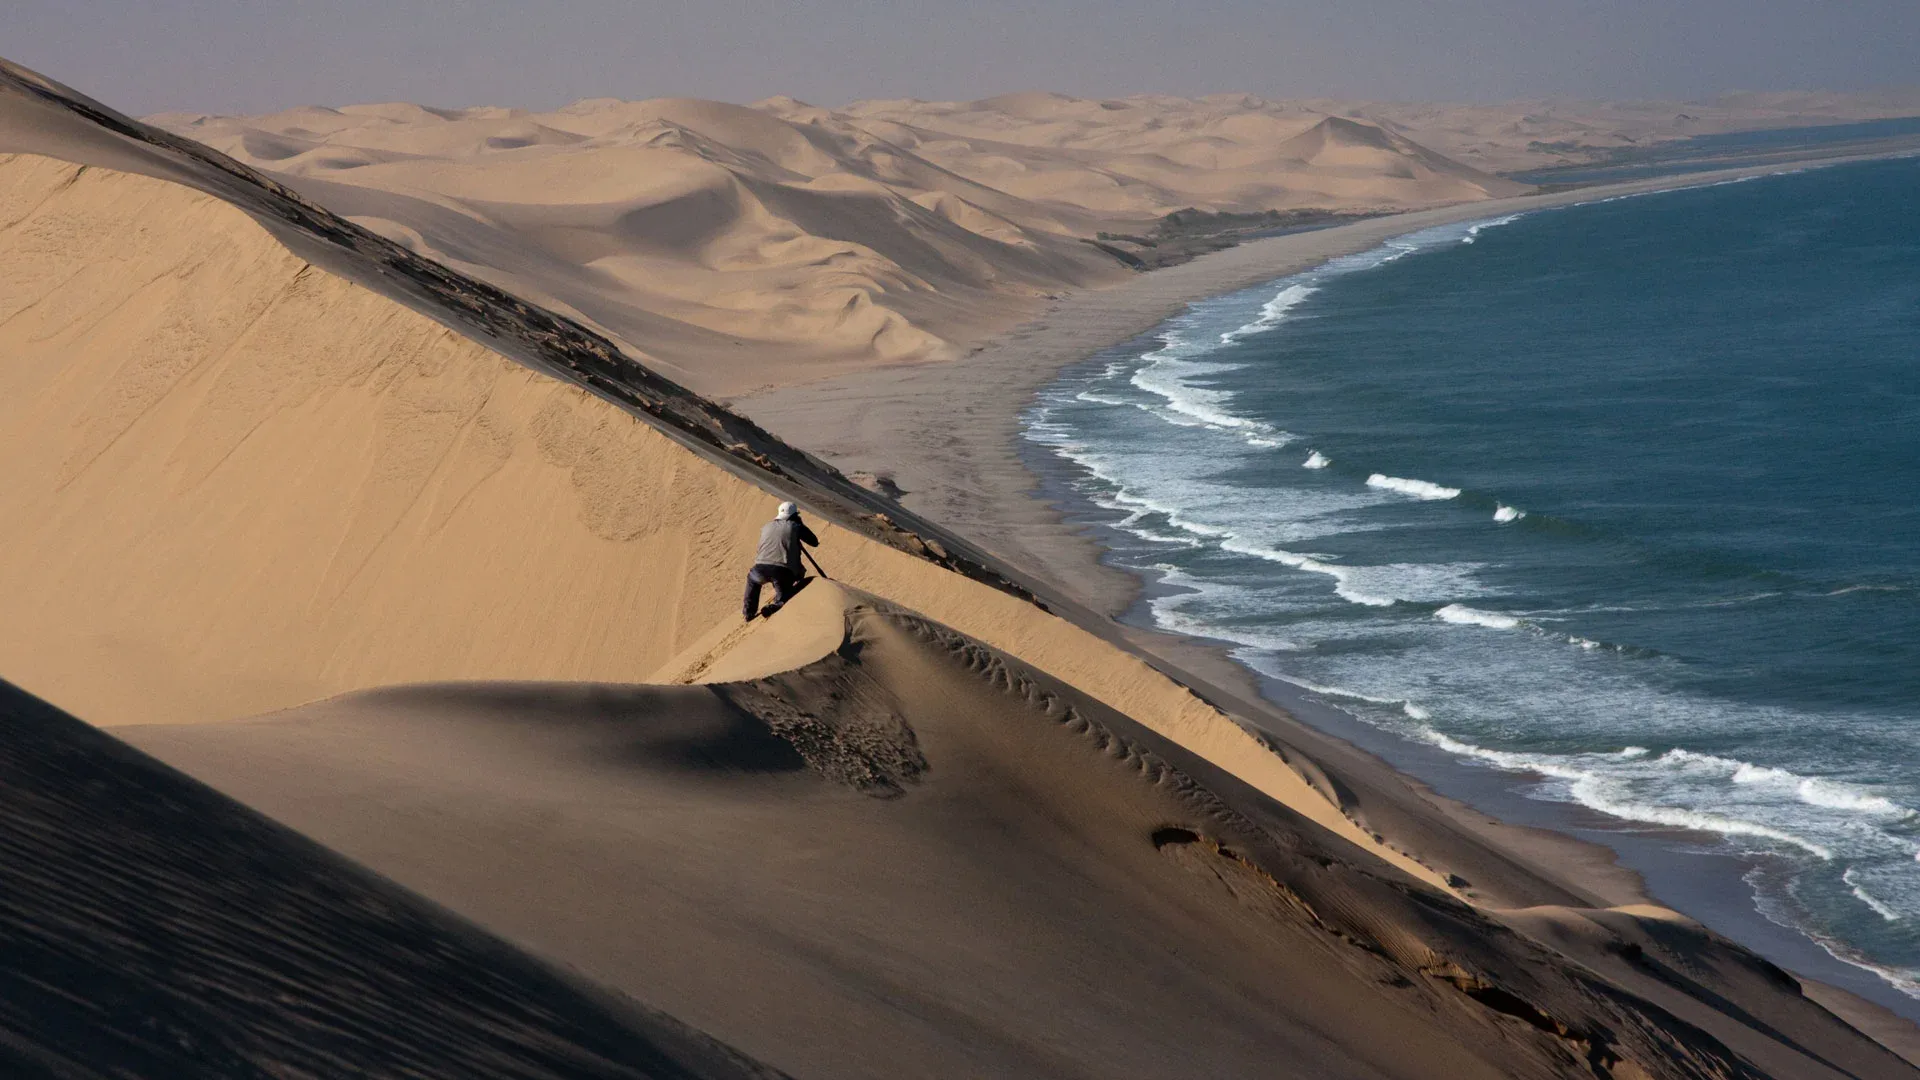 Guest photographing the beautiful Skeleton coast in Namibia